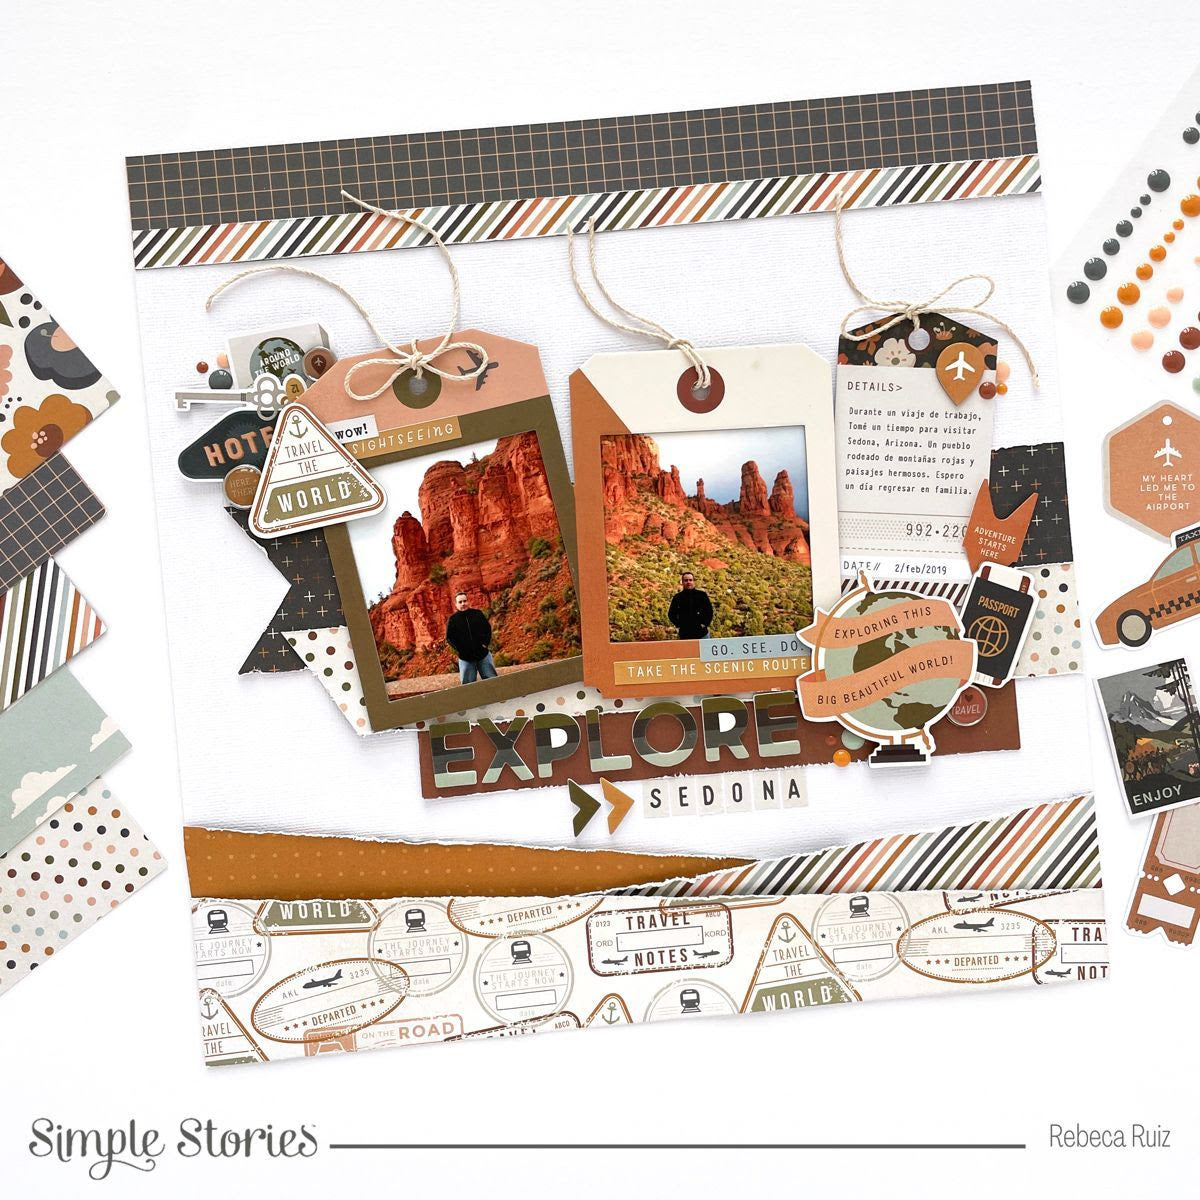 Simple Stories Collection Kit 12 x 12 Here & There